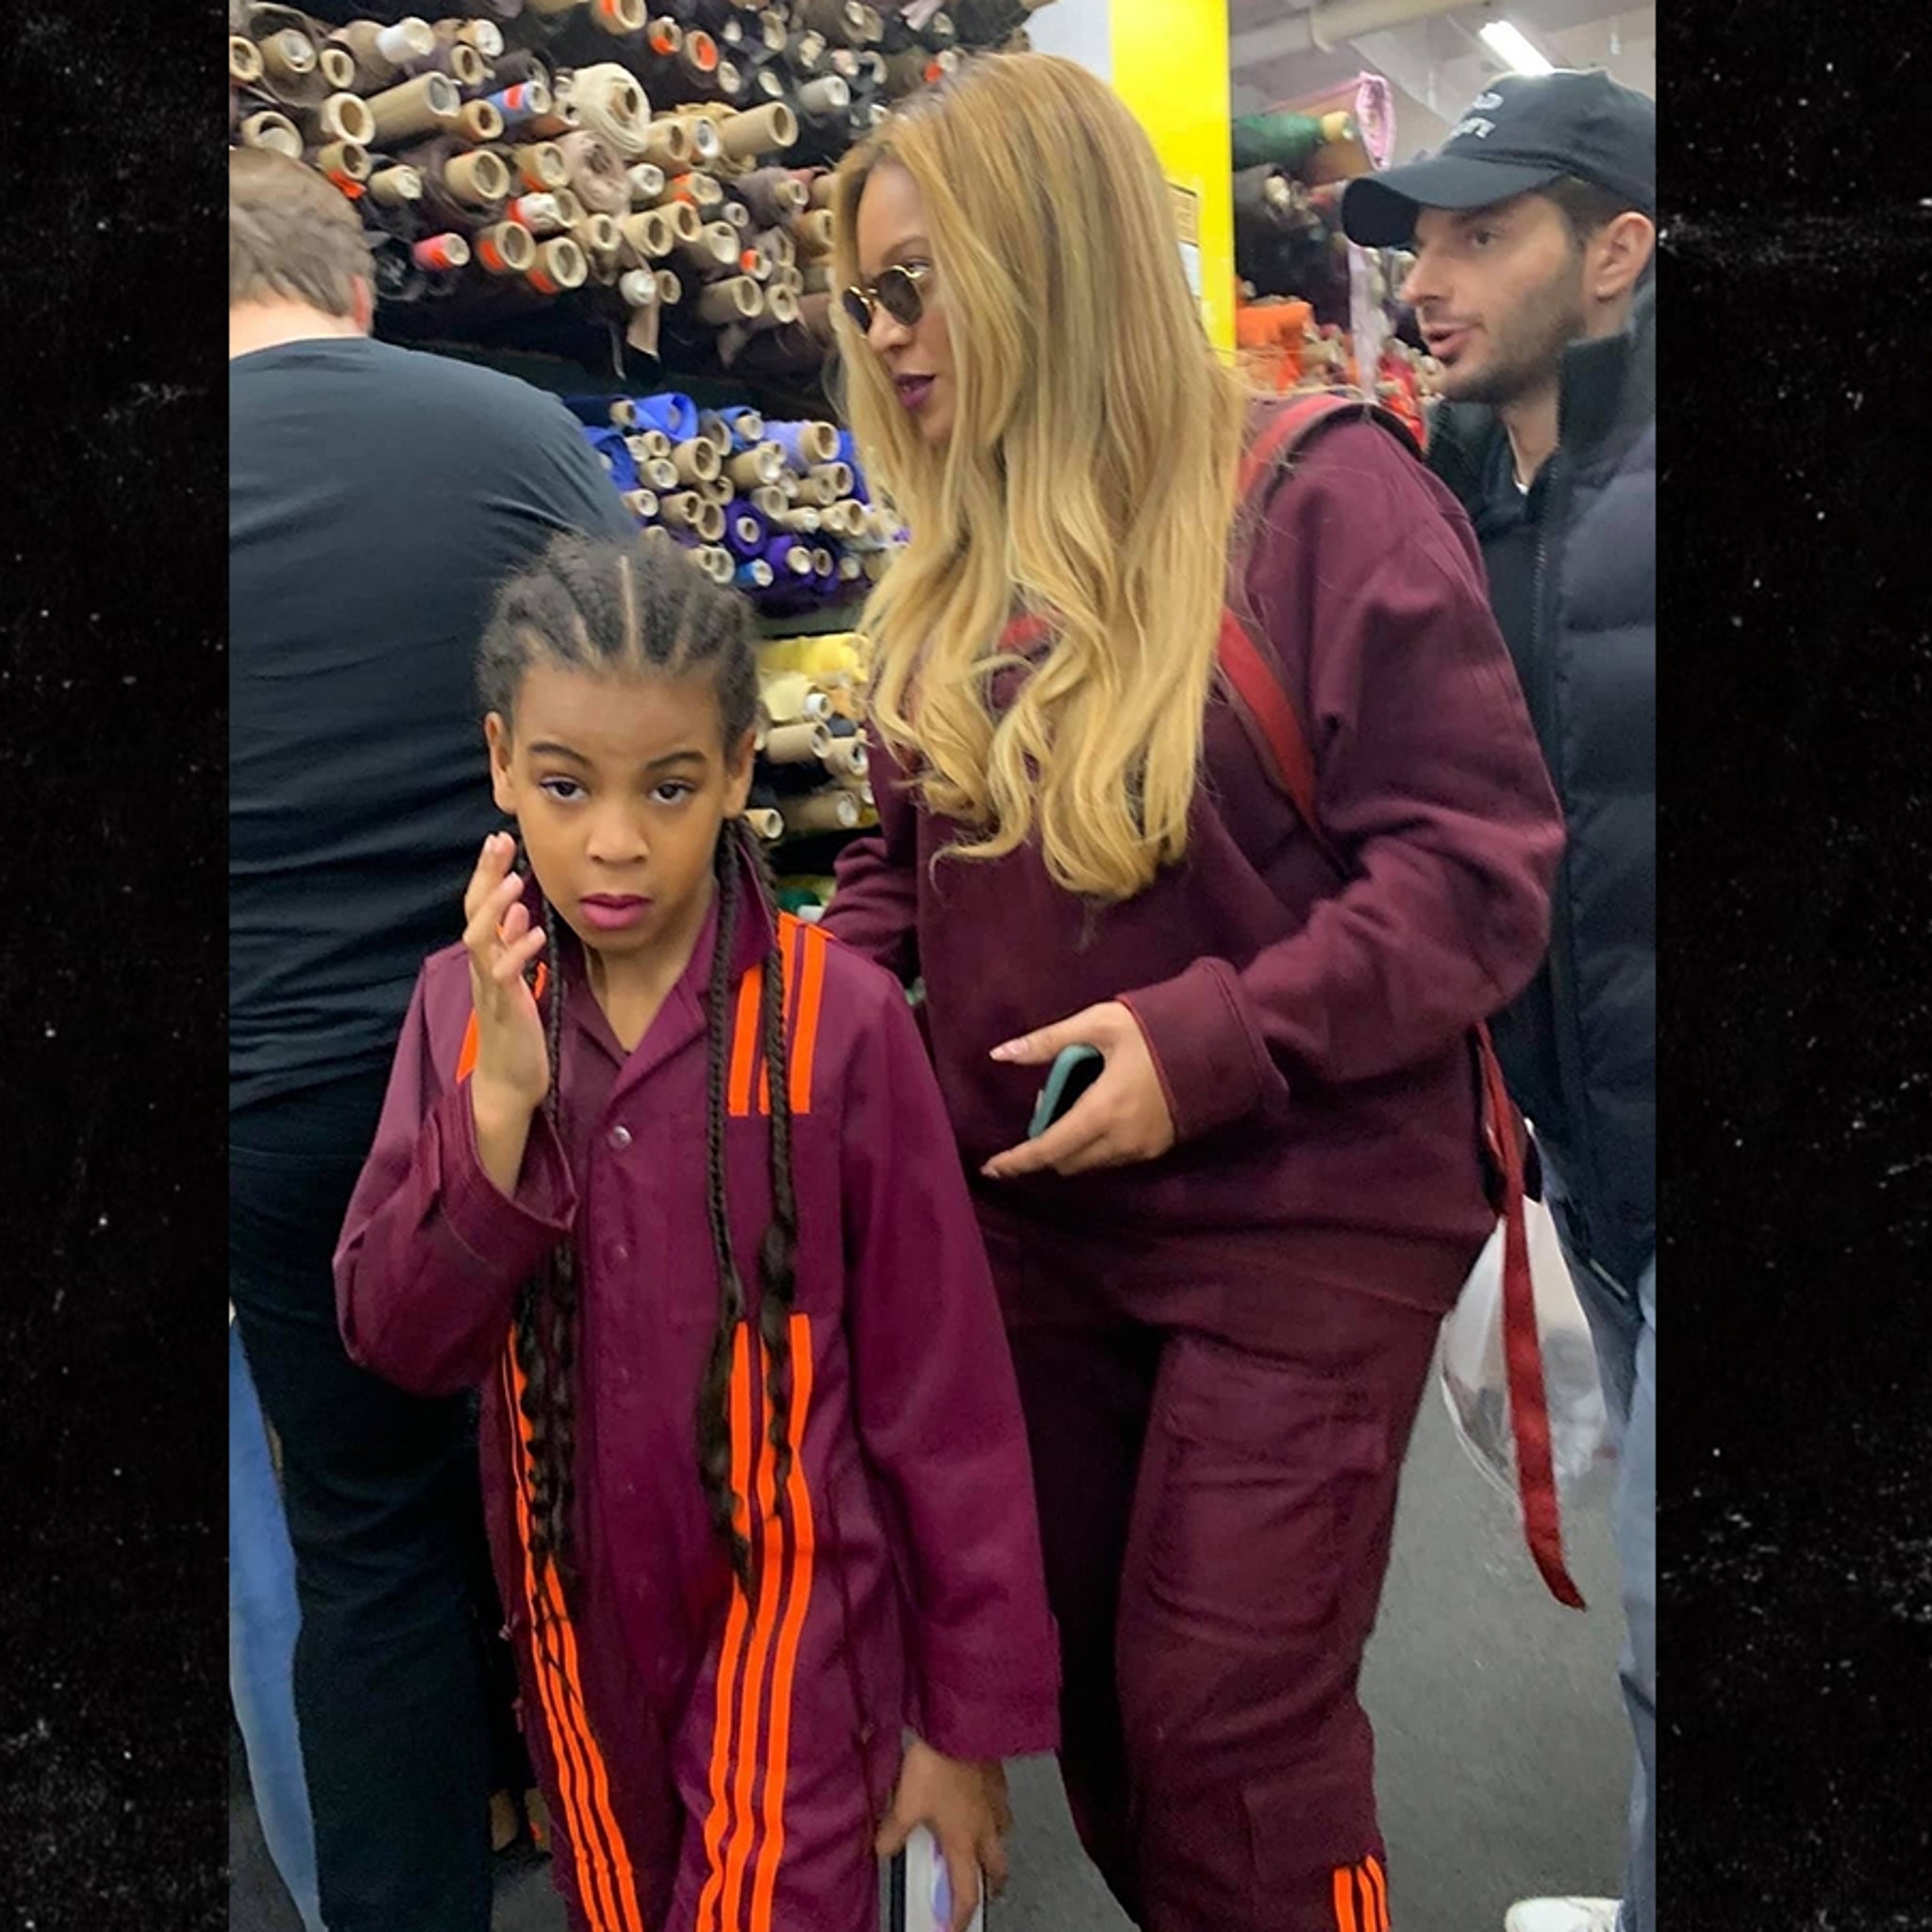 Beyonce and Wearing Adidas x Ivy Park Gear